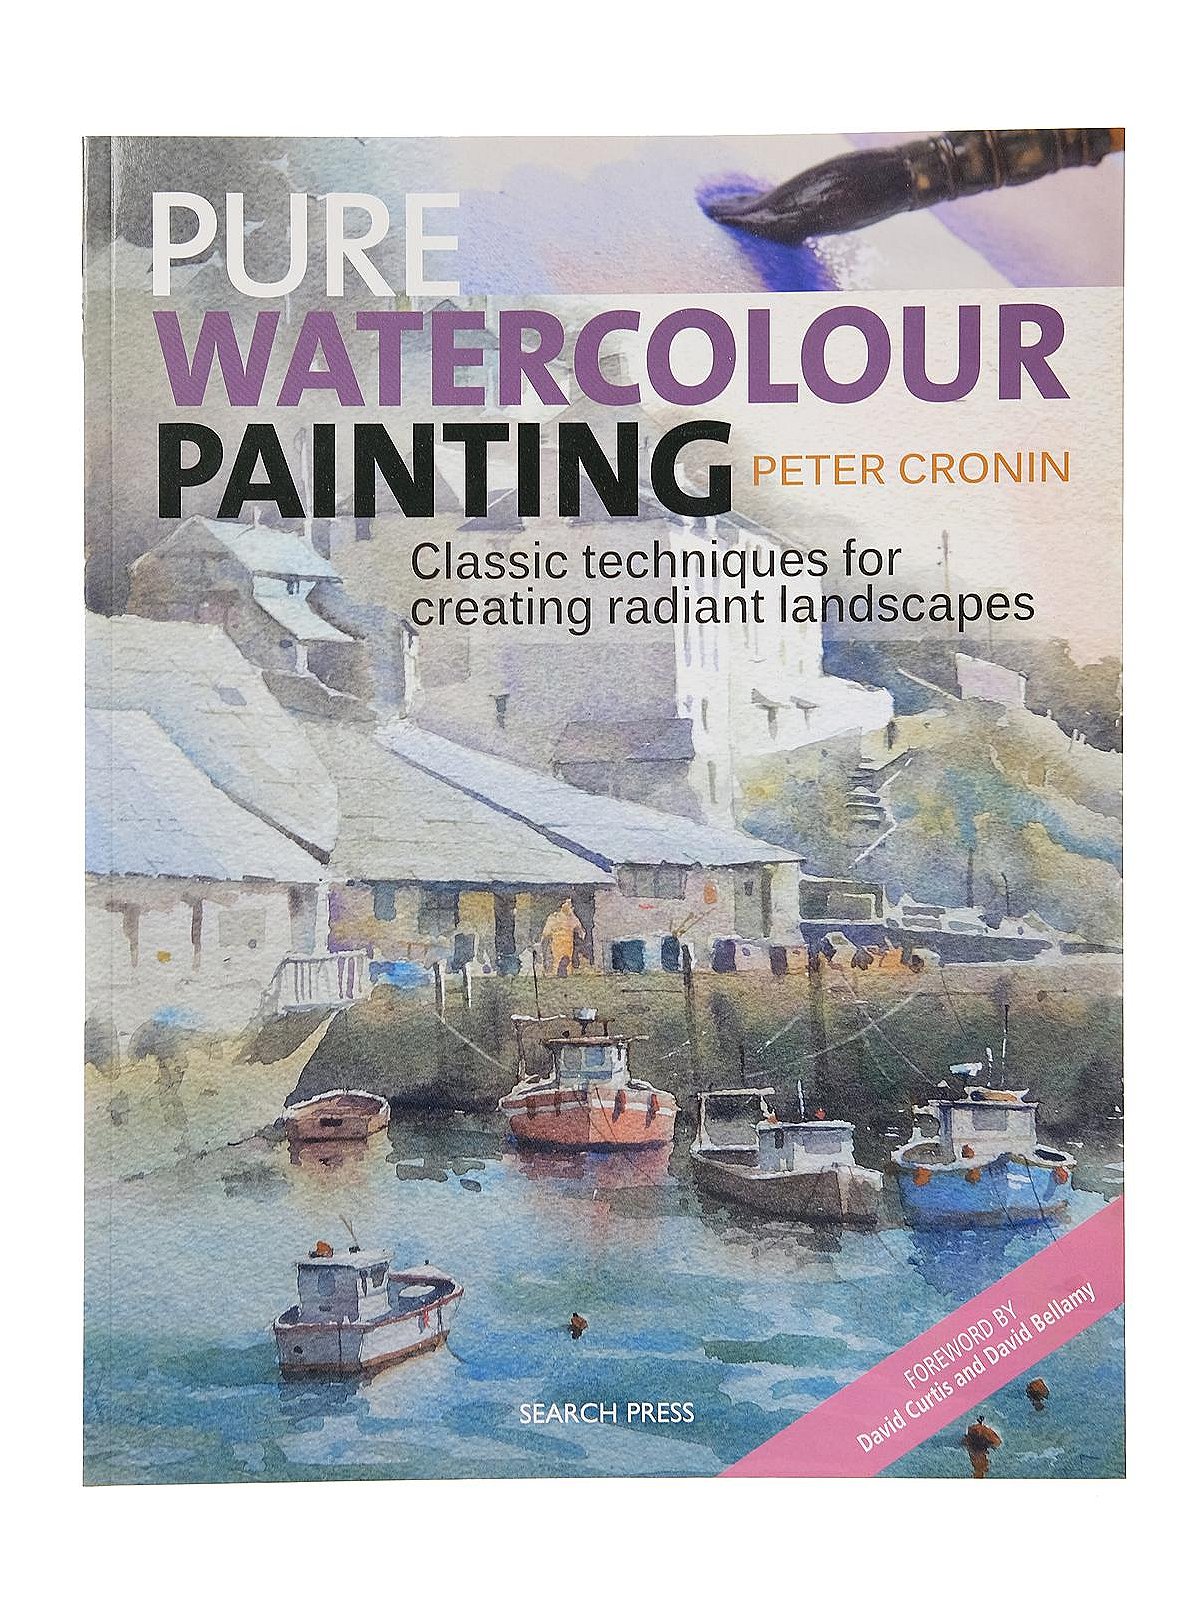 Pure Watercolour Painting: Classic Techniques for Creating Radiant Landscapes [Book]